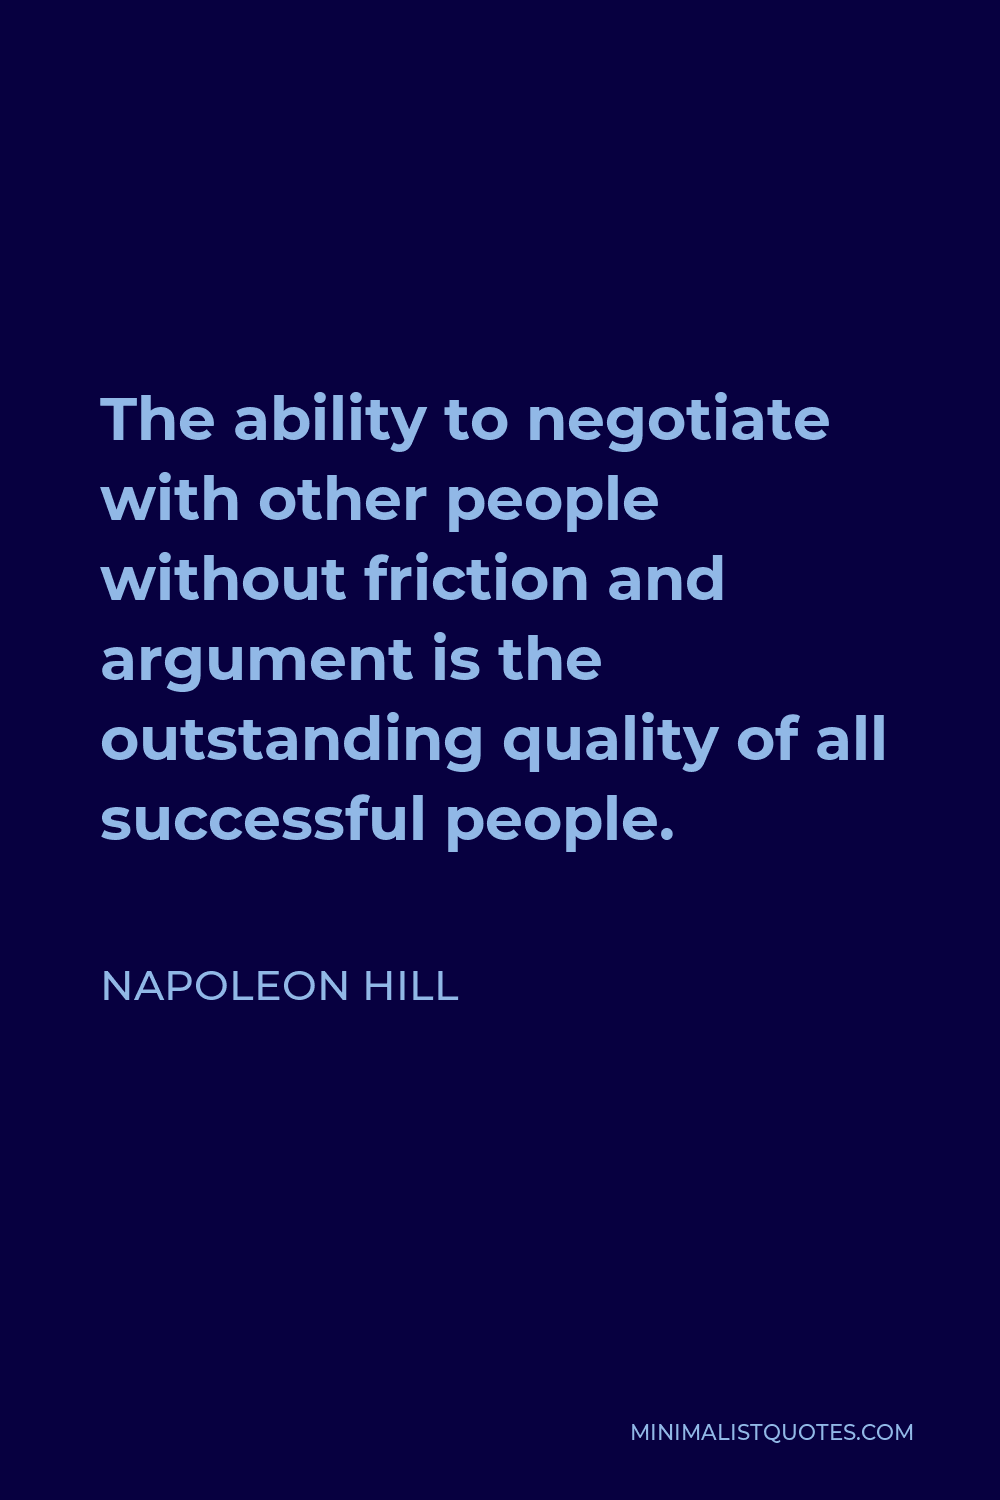 Napoleon Hill Quote - The ability to negotiate with other people without friction and argument is the outstanding quality of all successful people.